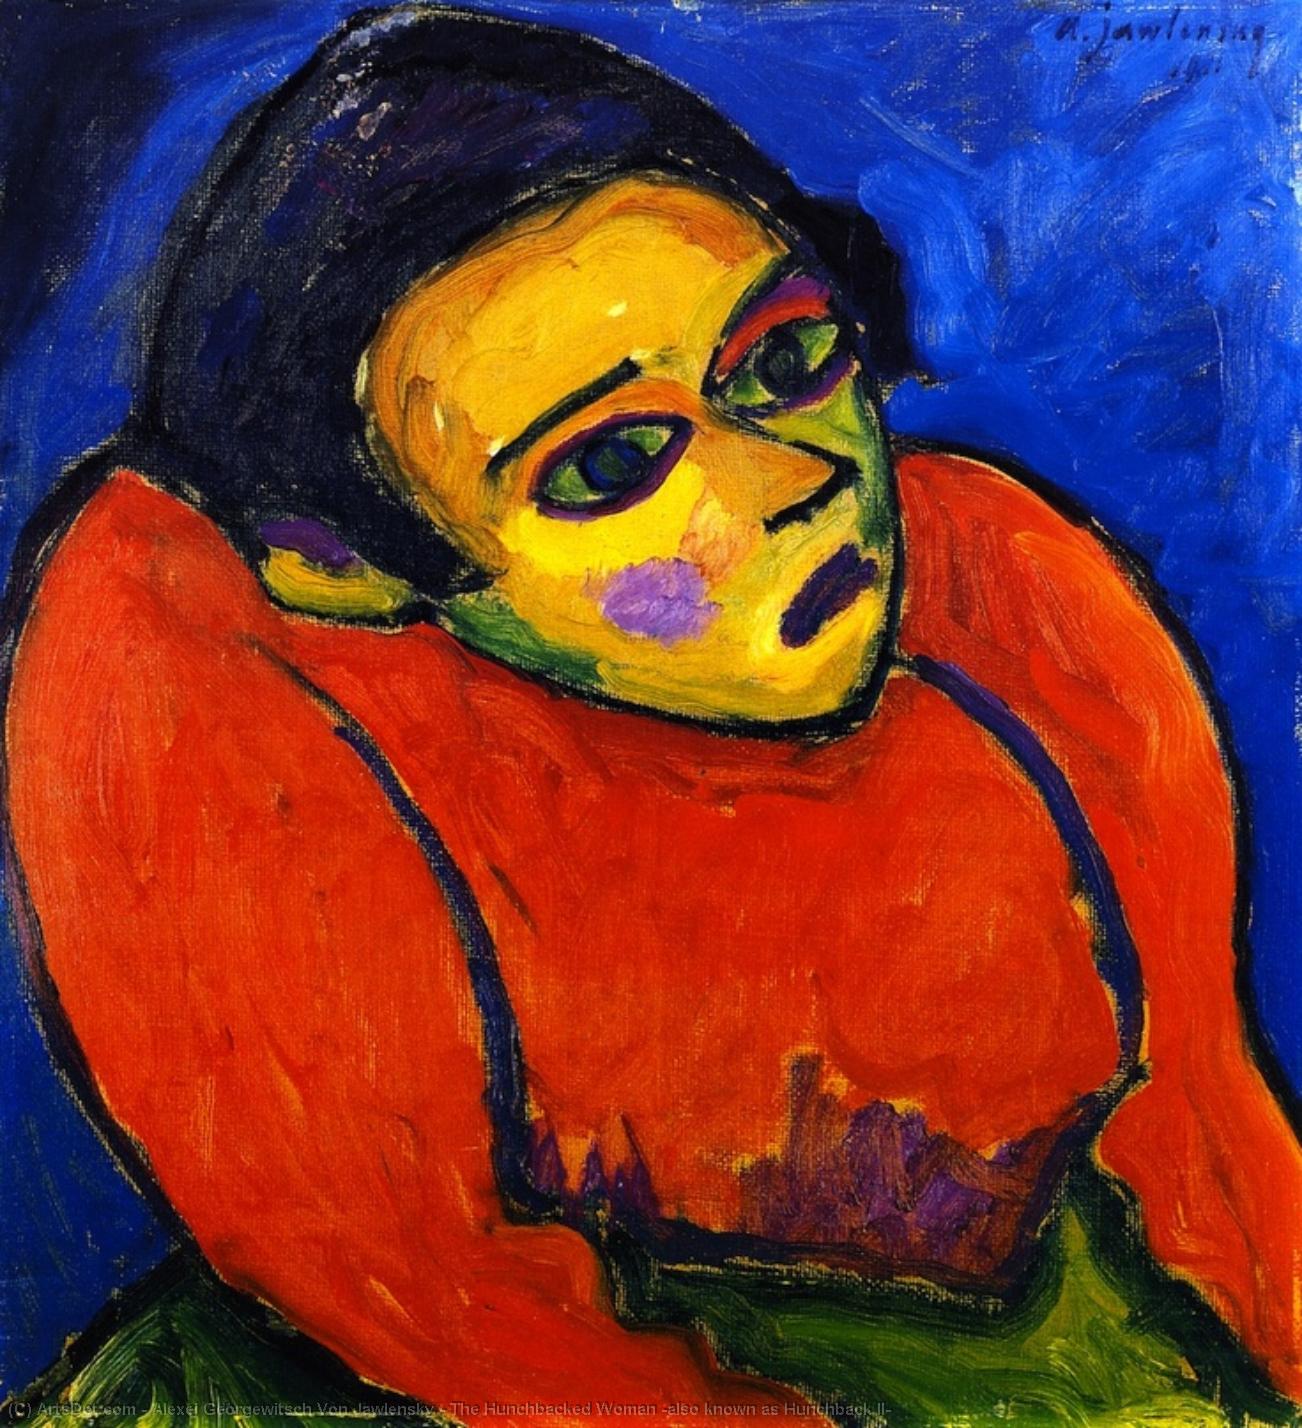 Buy Museum Art Reproductions The Hunchbacked Woman (also known as Hunchback II), 1911 by Alexej Georgewitsch Von Jawlensky (1864-1941, Russia) | ArtsDot.com